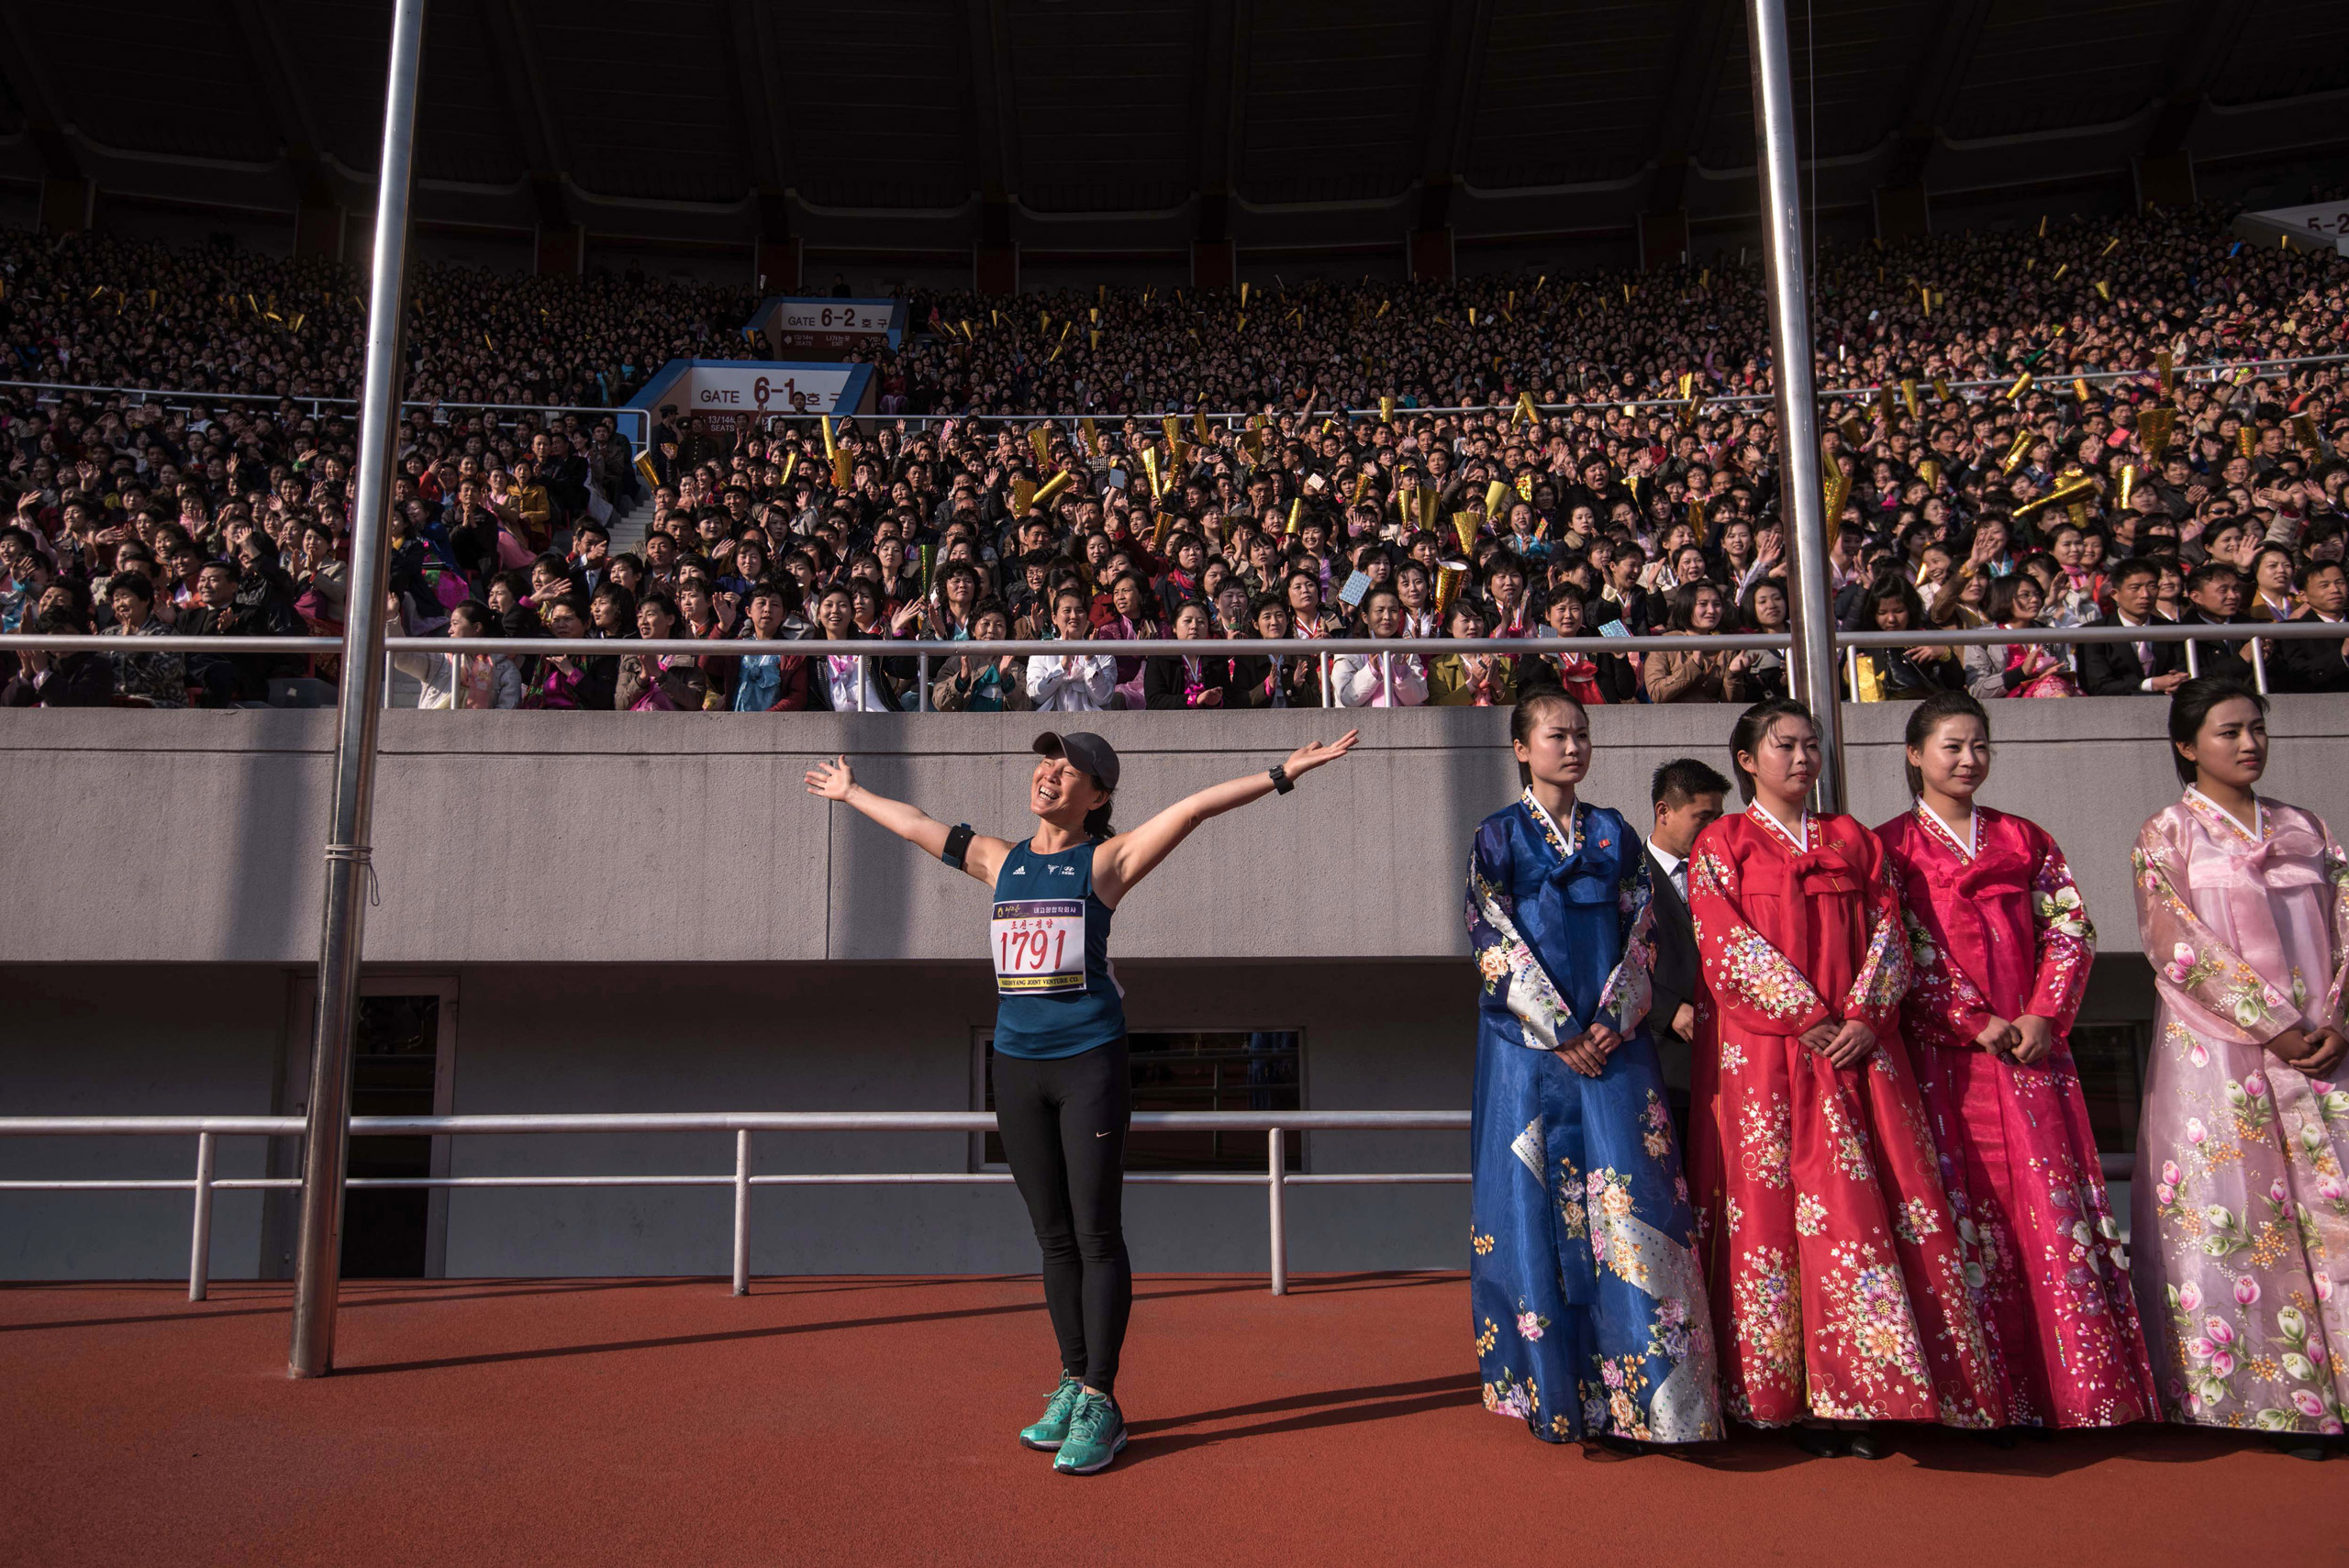 A foreign competitor poses for a photo prior to the start of the Pyongyang Marathon at Kim Il-Sung stadium in Pyongyang on April 9, 2017. Hundreds of foreigners lined up in Pyongyang's Kim Il-Sung Stadium on April 9 for the city's annual marathon, the highlight of the tourism calendar in isolated North Korea. (Ed Jones—AFP/Getty Images)